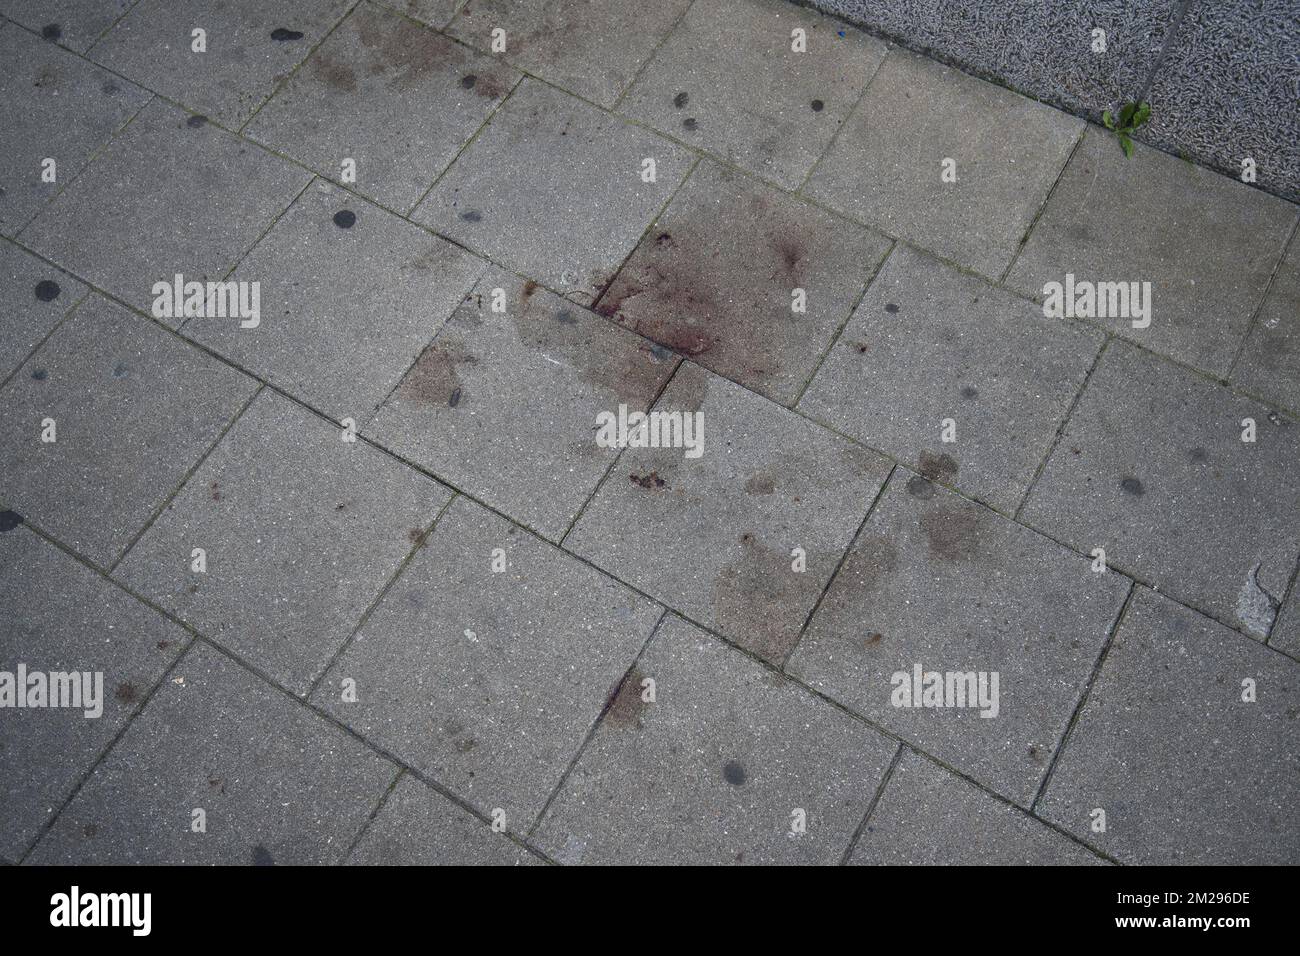 Illustration picture shows the scene where Yesterday a man attacked soldiers with a knife and was shot in the Boulevard Emile Jacqmain - Emile Jacqmainlaan in the city centre of Brussels, Saturday 26 August 2017. BELGA PHOTO LAURIE DIEFFEMBACQ  Stock Photo